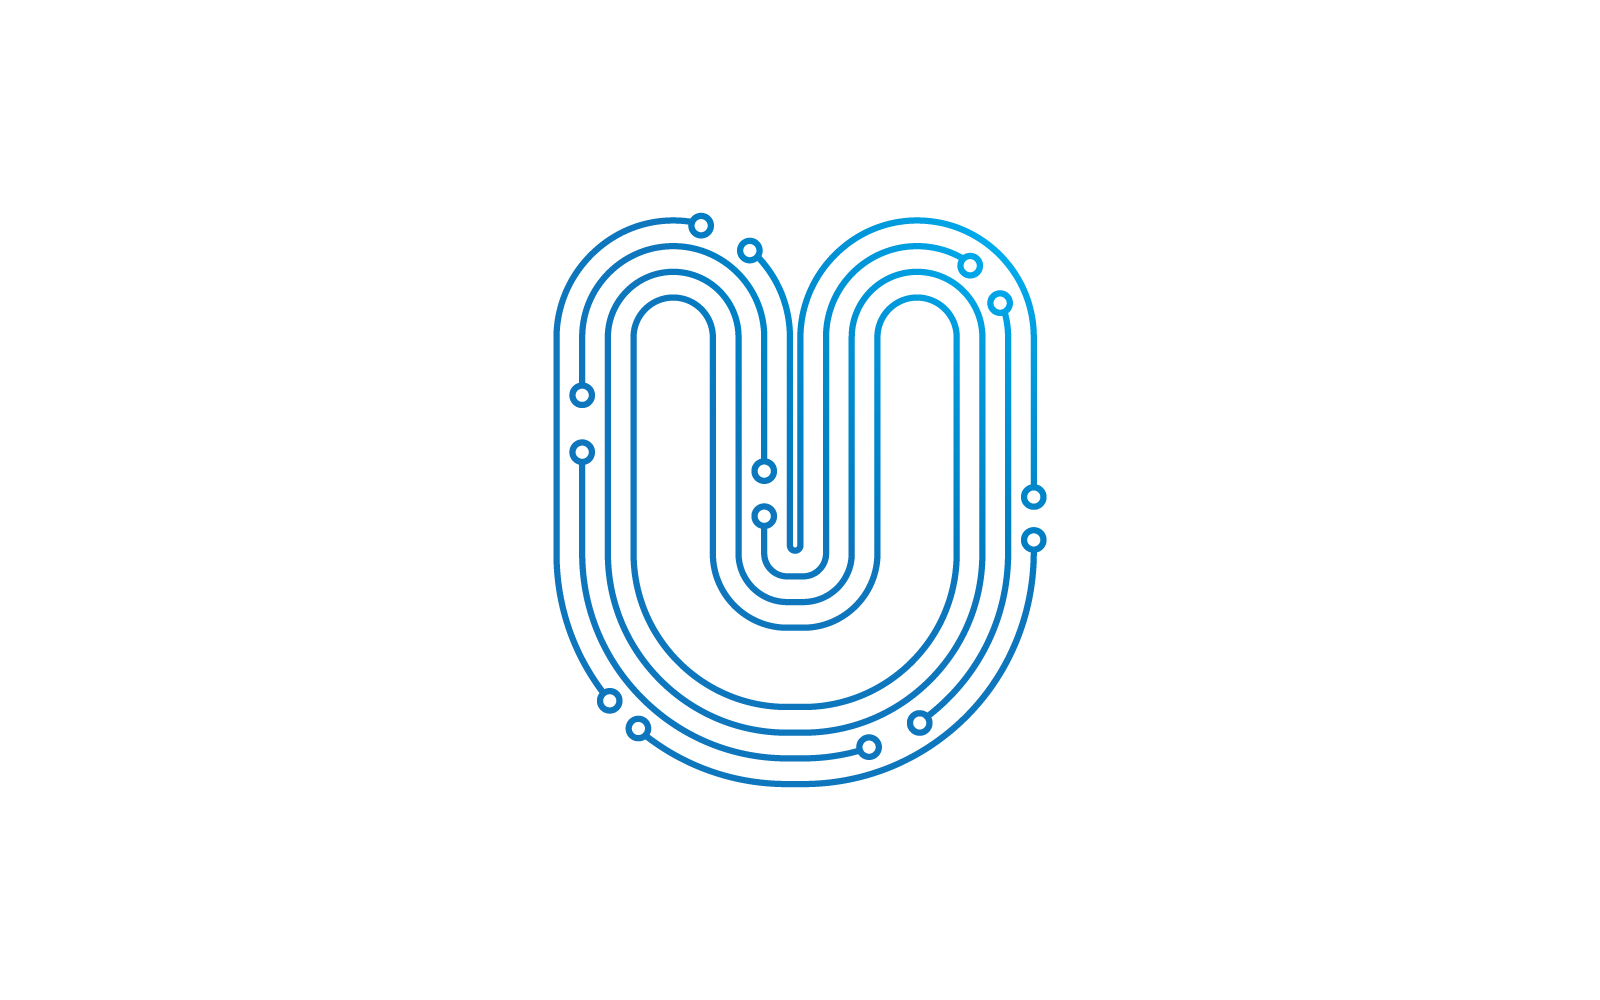 U initial letter Circuit technology illustration logo vector template